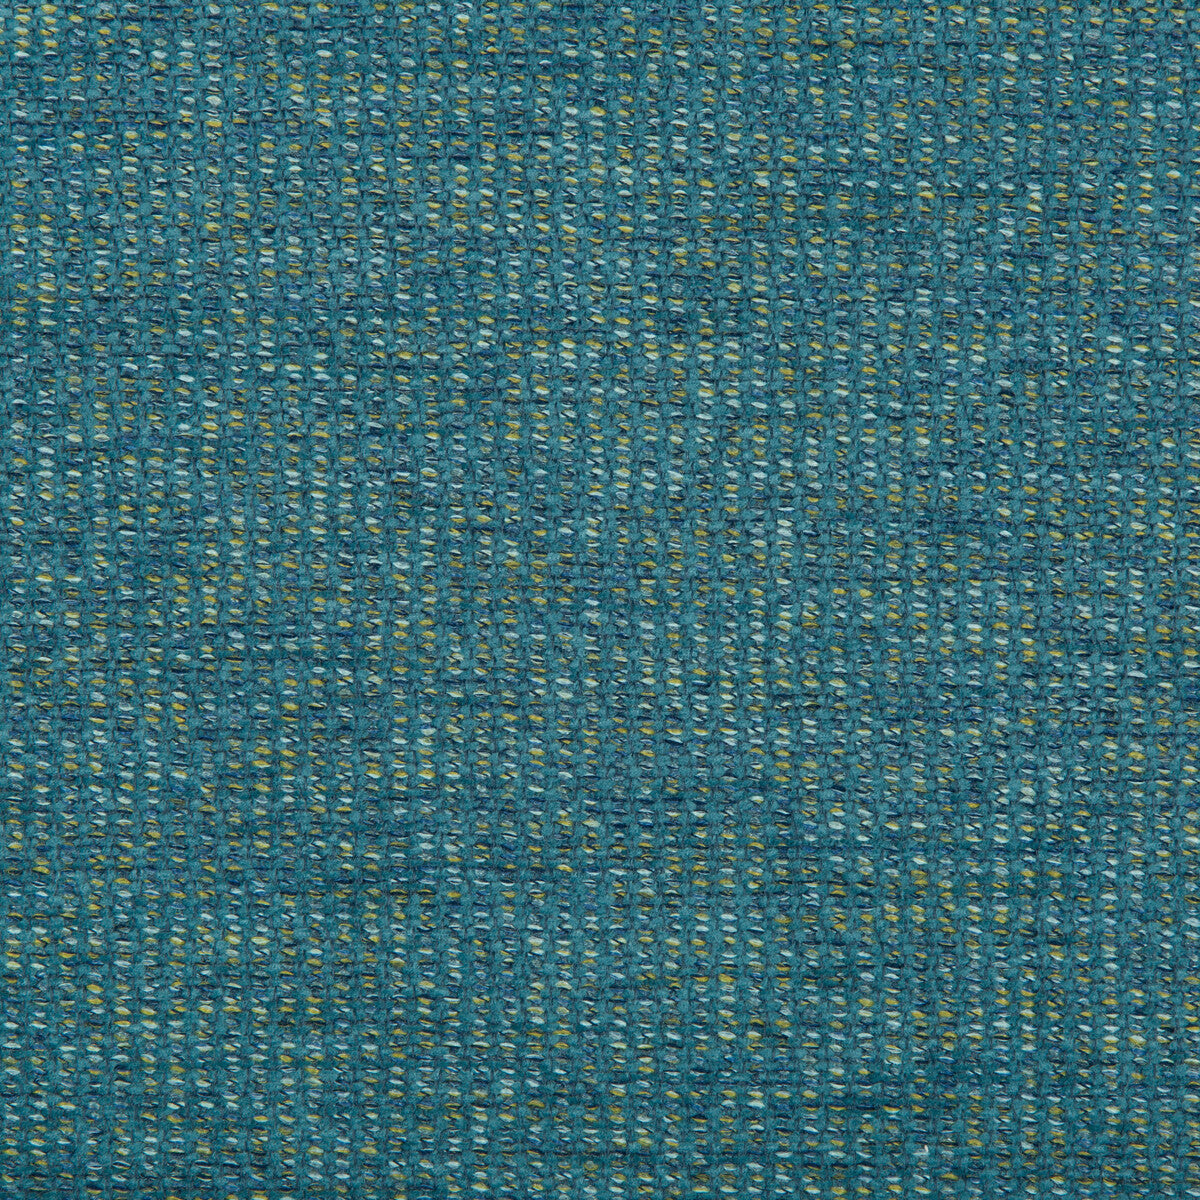 Kravet Contract fabric in 35433-35 color - pattern 35433.35.0 - by Kravet Contract